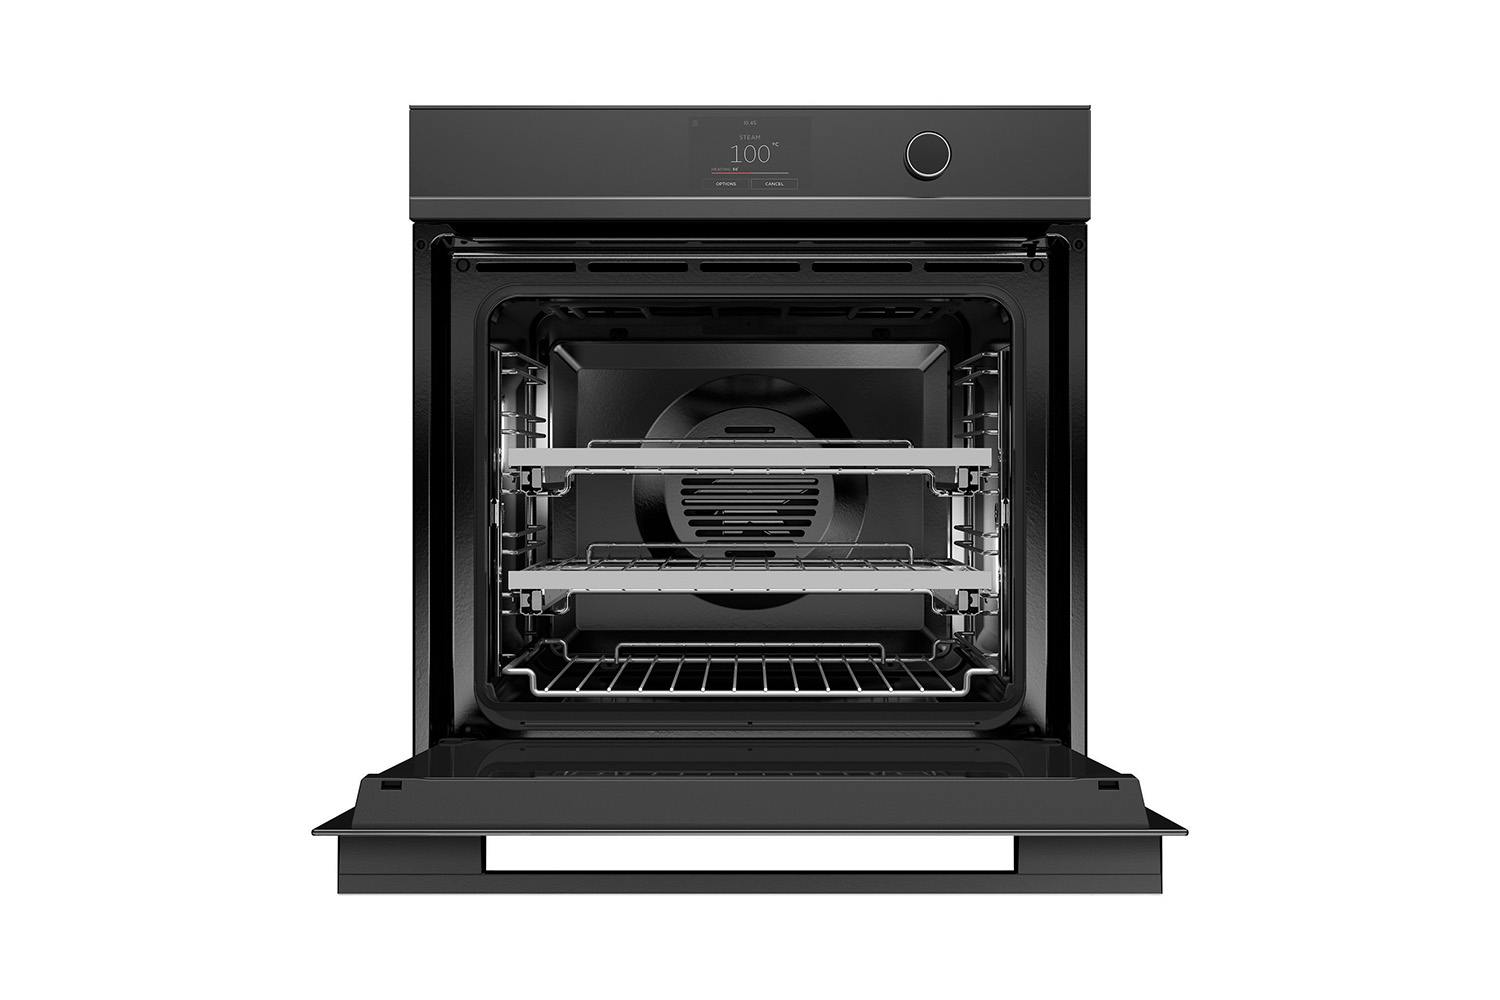 Fisher & Paykel 60cm 11 Function Combi Steam Oven